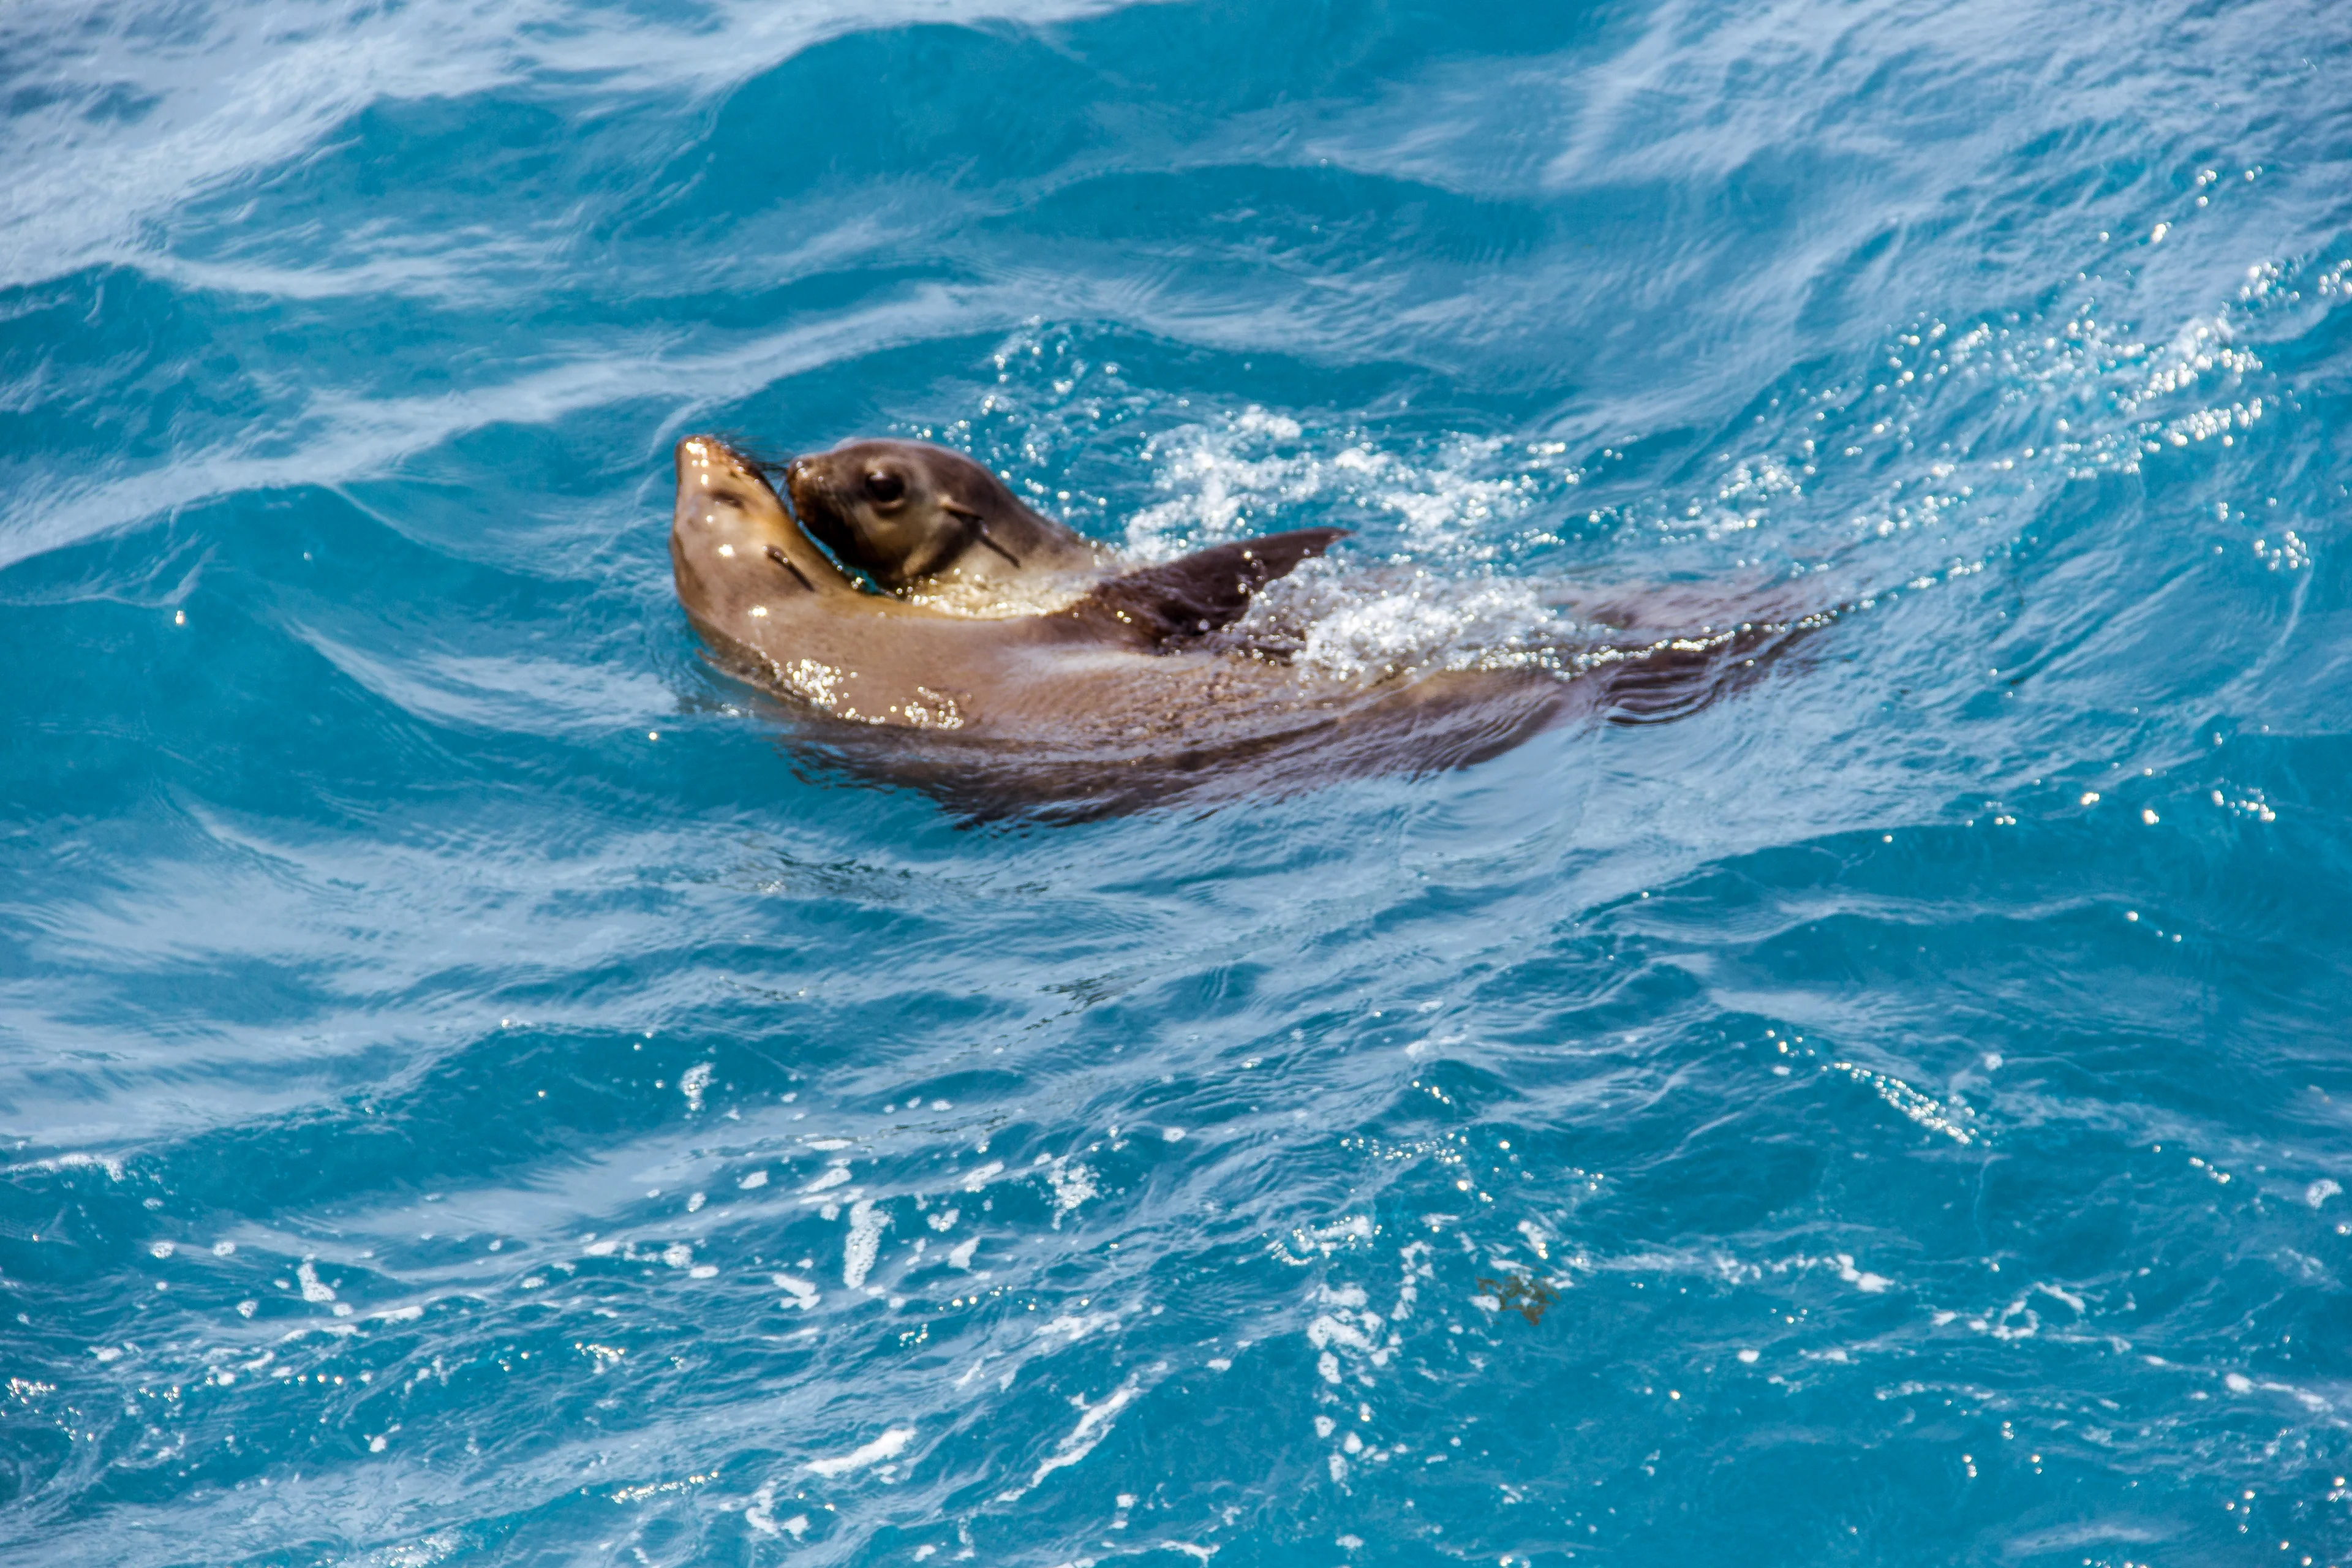 Two seals in an embrace in the sea off, photo taken from wildlife watching boat, Phillip Island